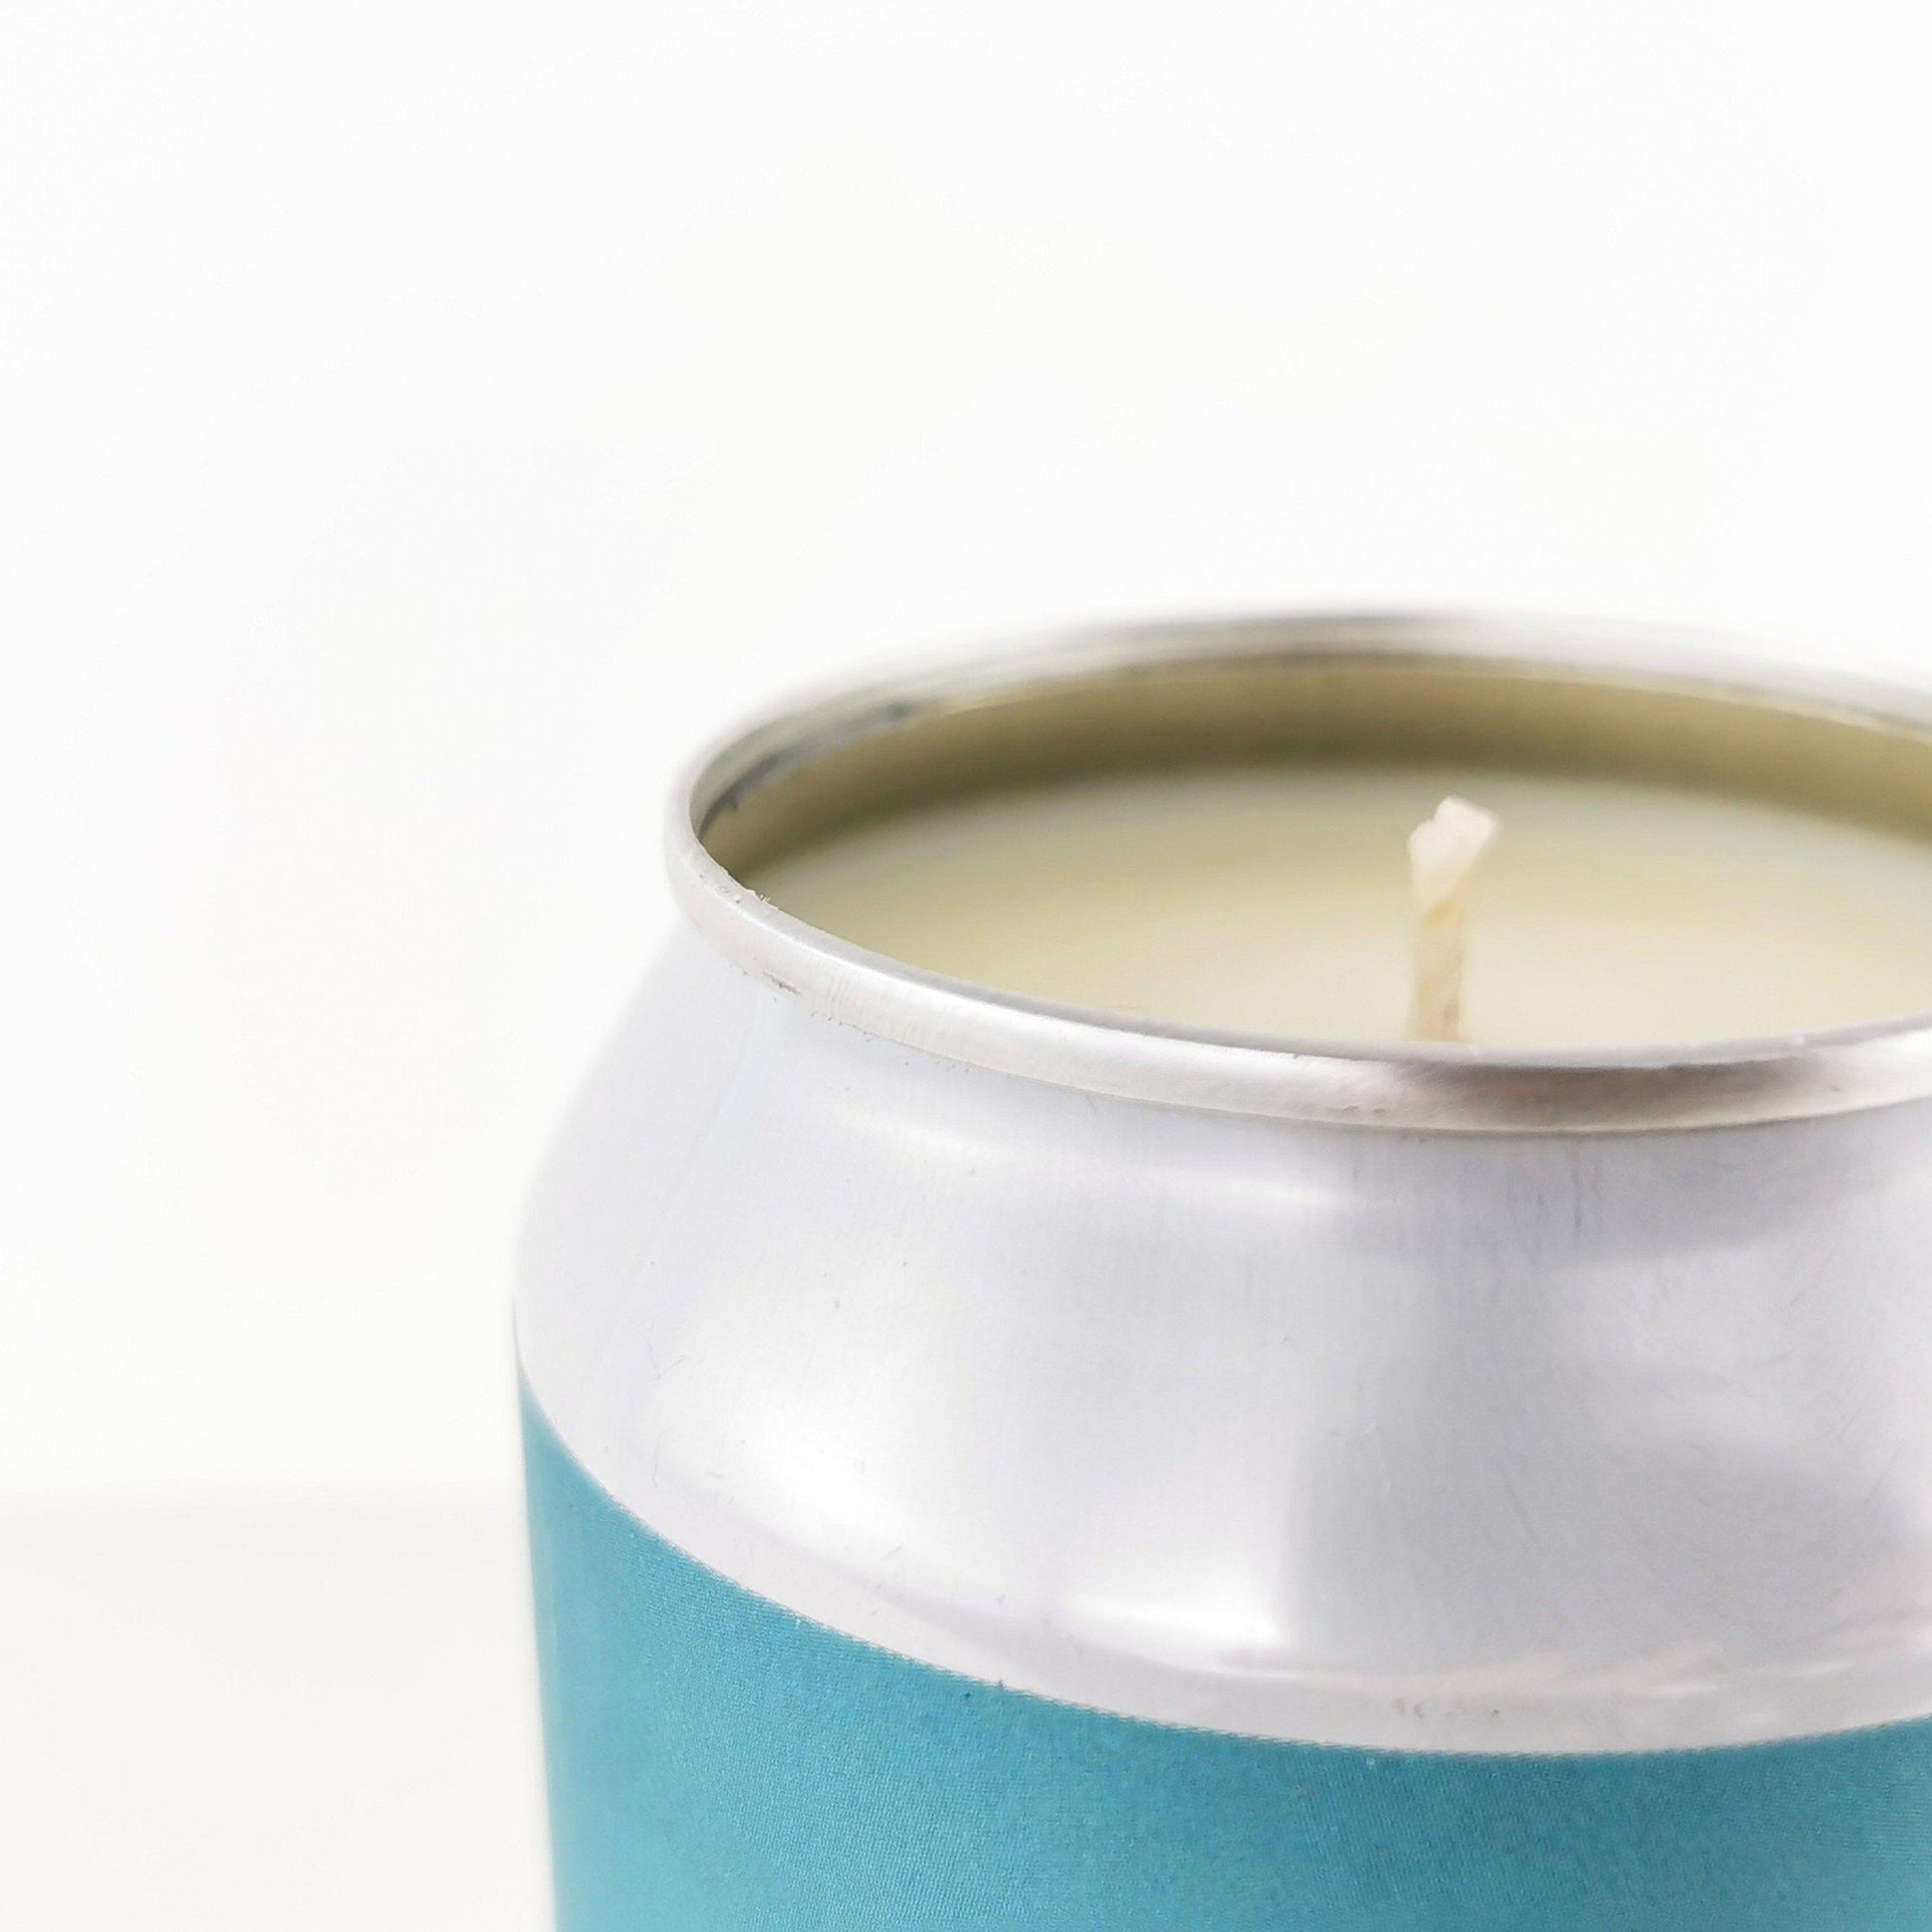 Pomona Island How do you sleep Craft Beer Can Candle-Beer Can Candles-Adhock Homeware